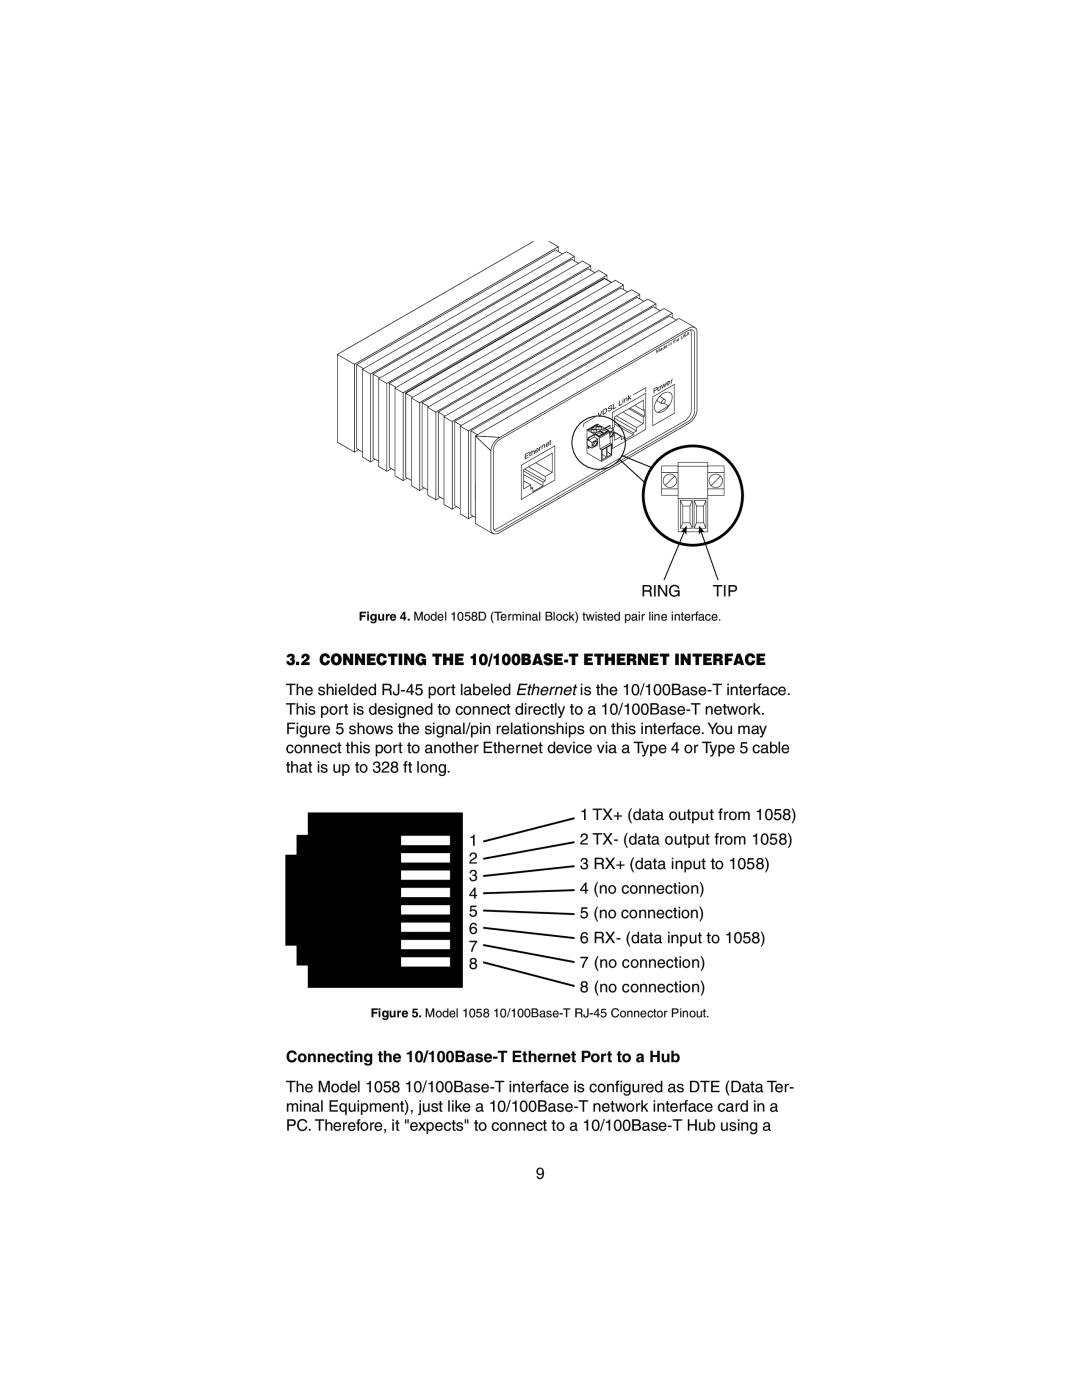 Patton electronic Model 1058 user manual CONNECTING THE 10/100BASE-T ETHERNET INTERFACE 